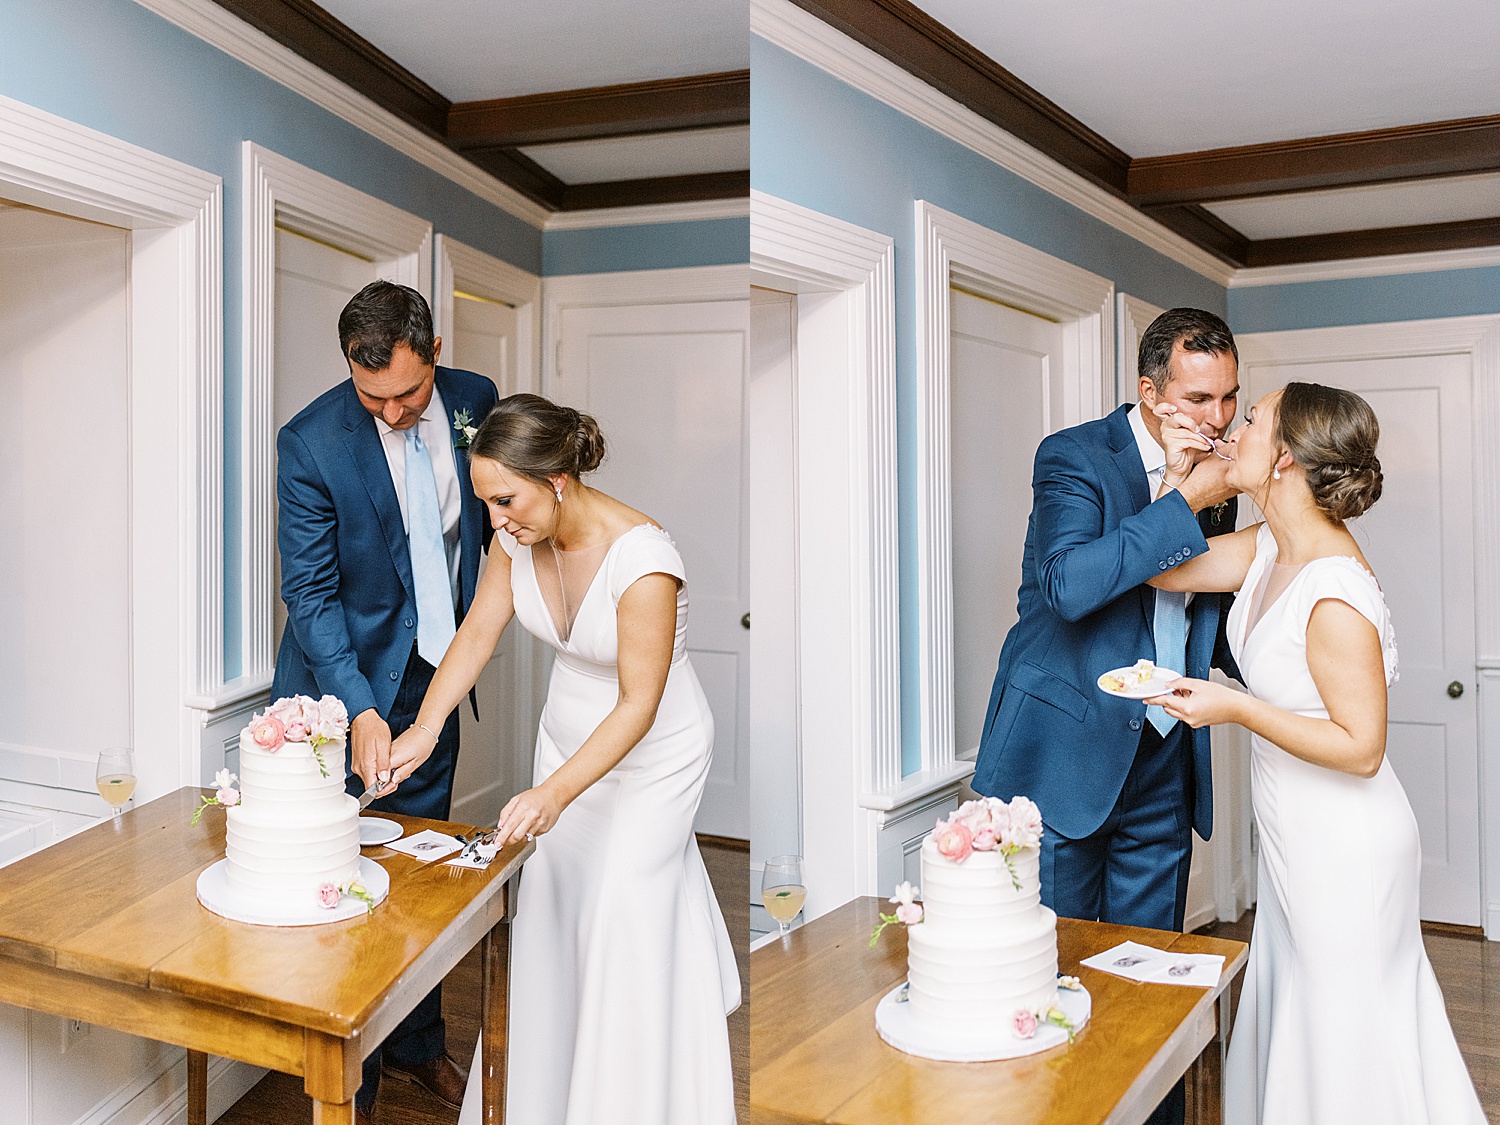 Newlyweds cut white cake at their reception by Cape Cod wedding photographer Lynne Reznick